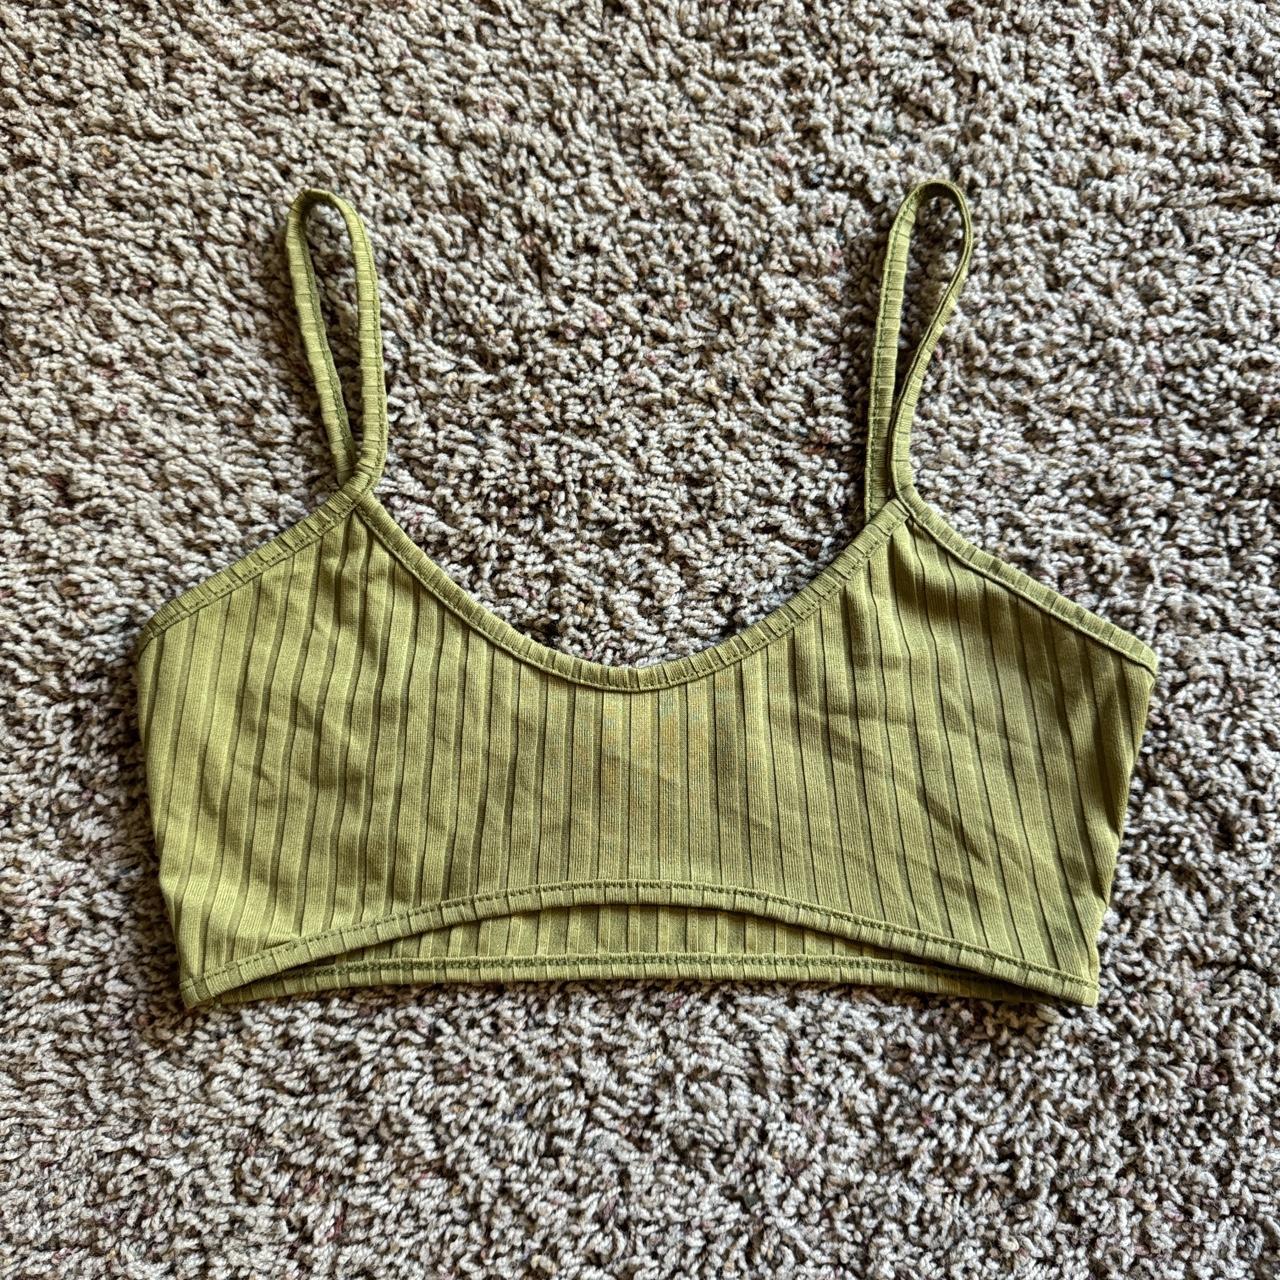 Mustard yellow lace bralette / crop top from new - Depop